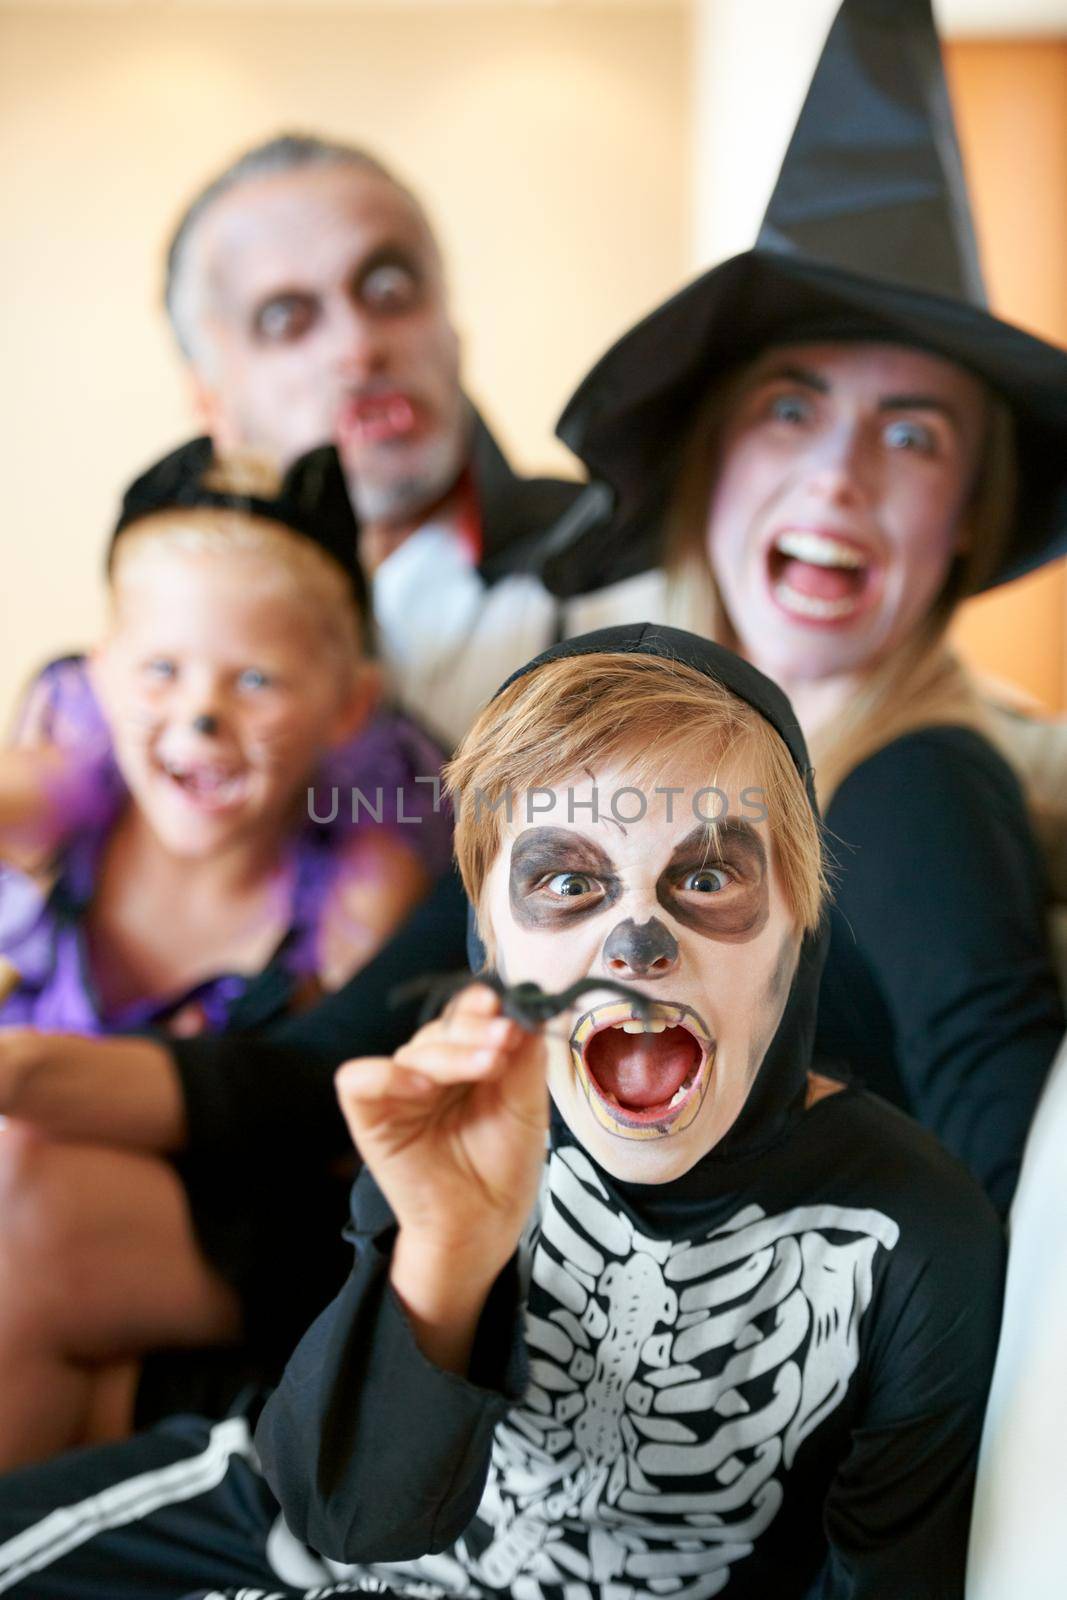 A cute family dressed up for Halloweamp039en screaming at the camera.